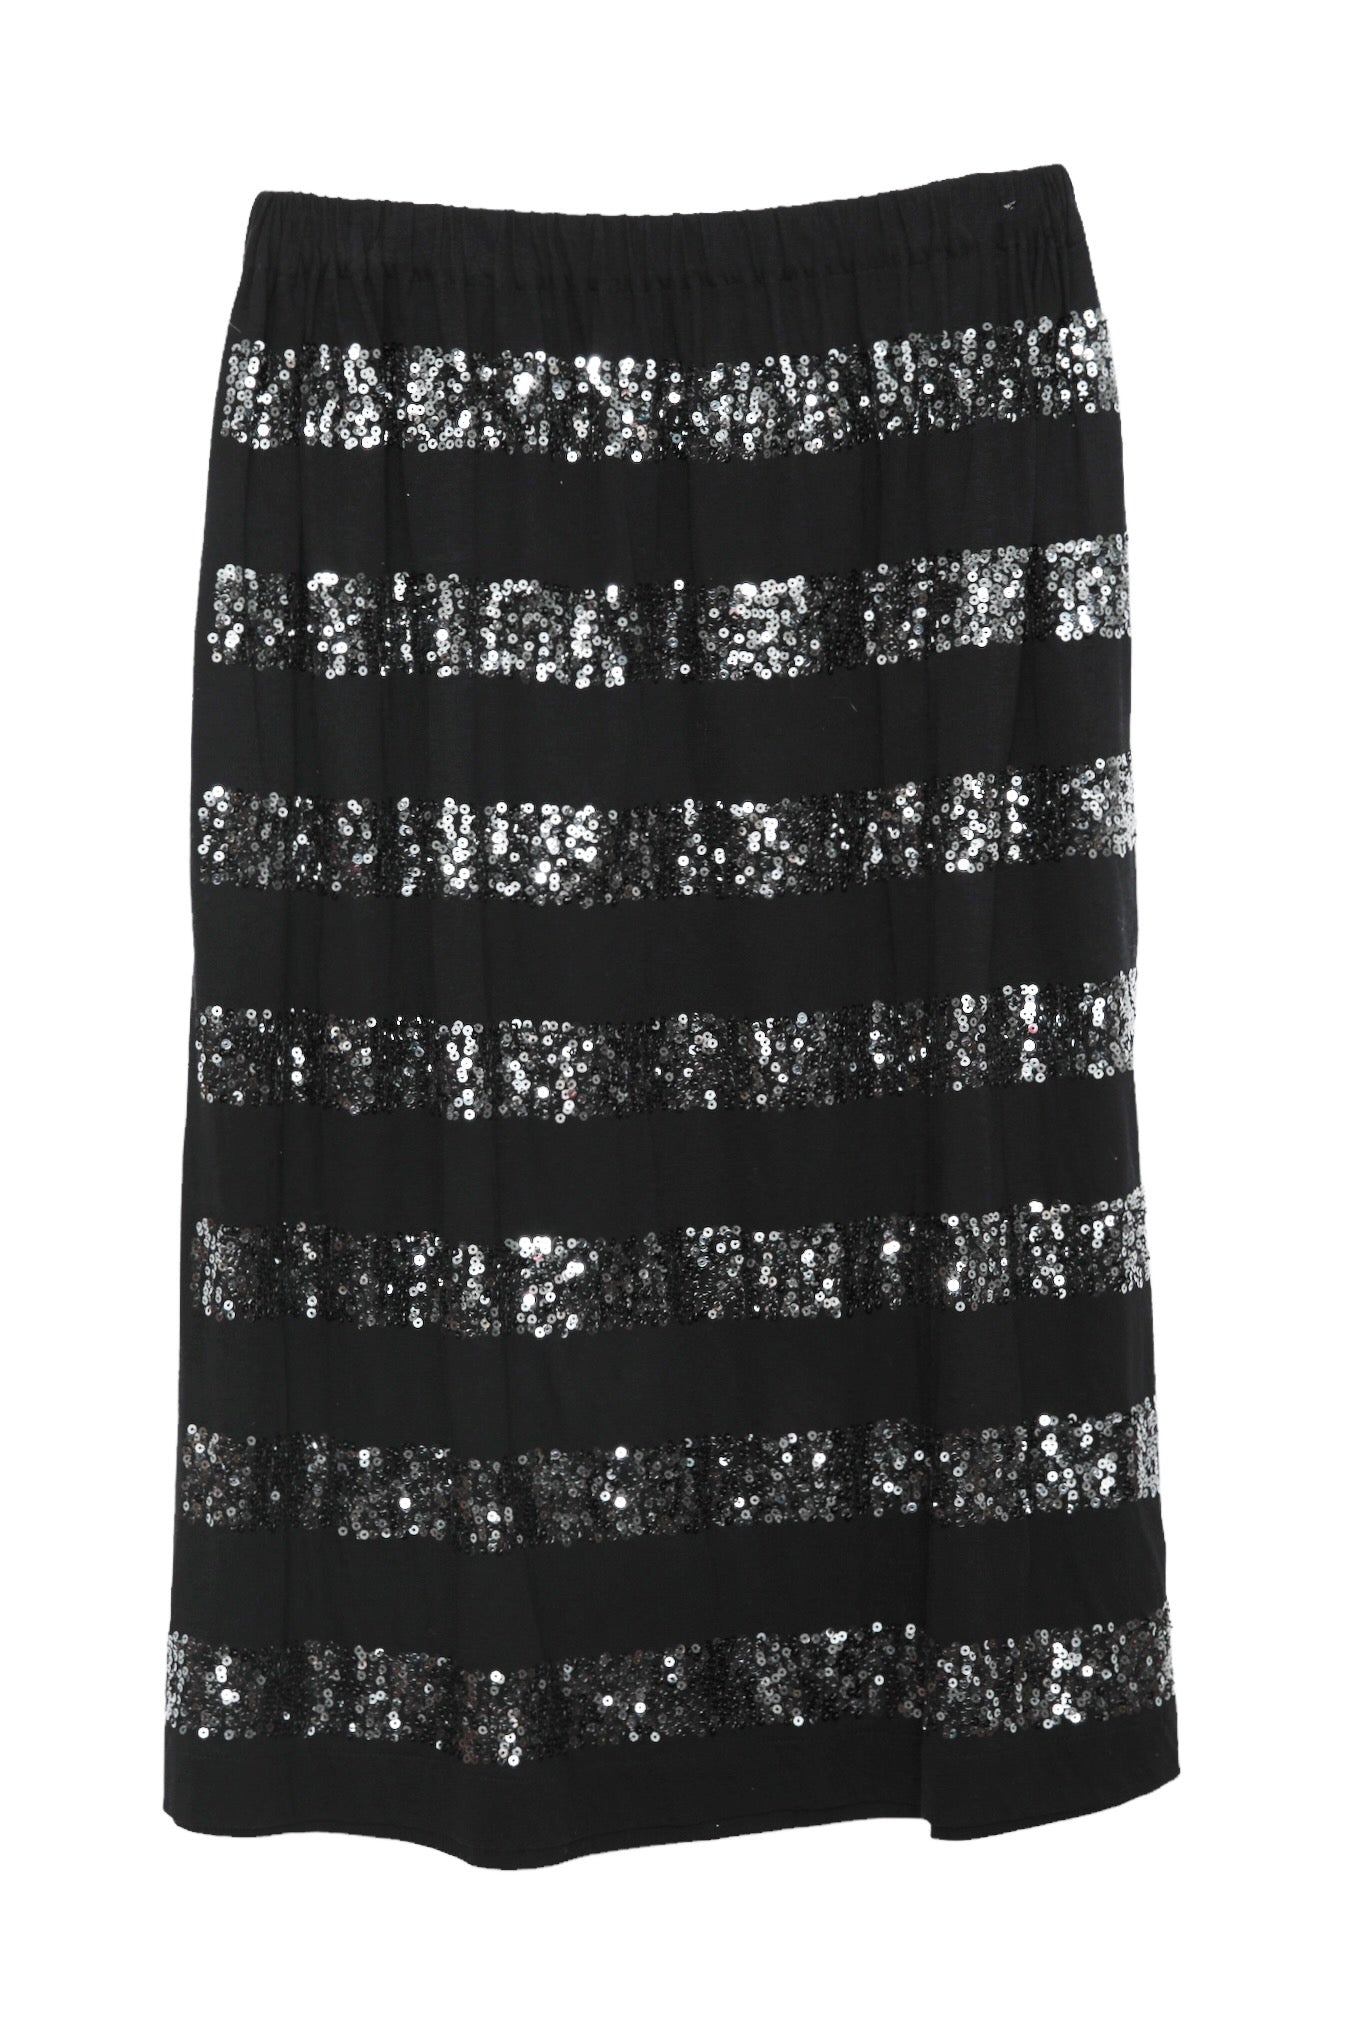 AD2011 TRICOT COMME DES GARCONS SEQUINED BORDER SKIRT